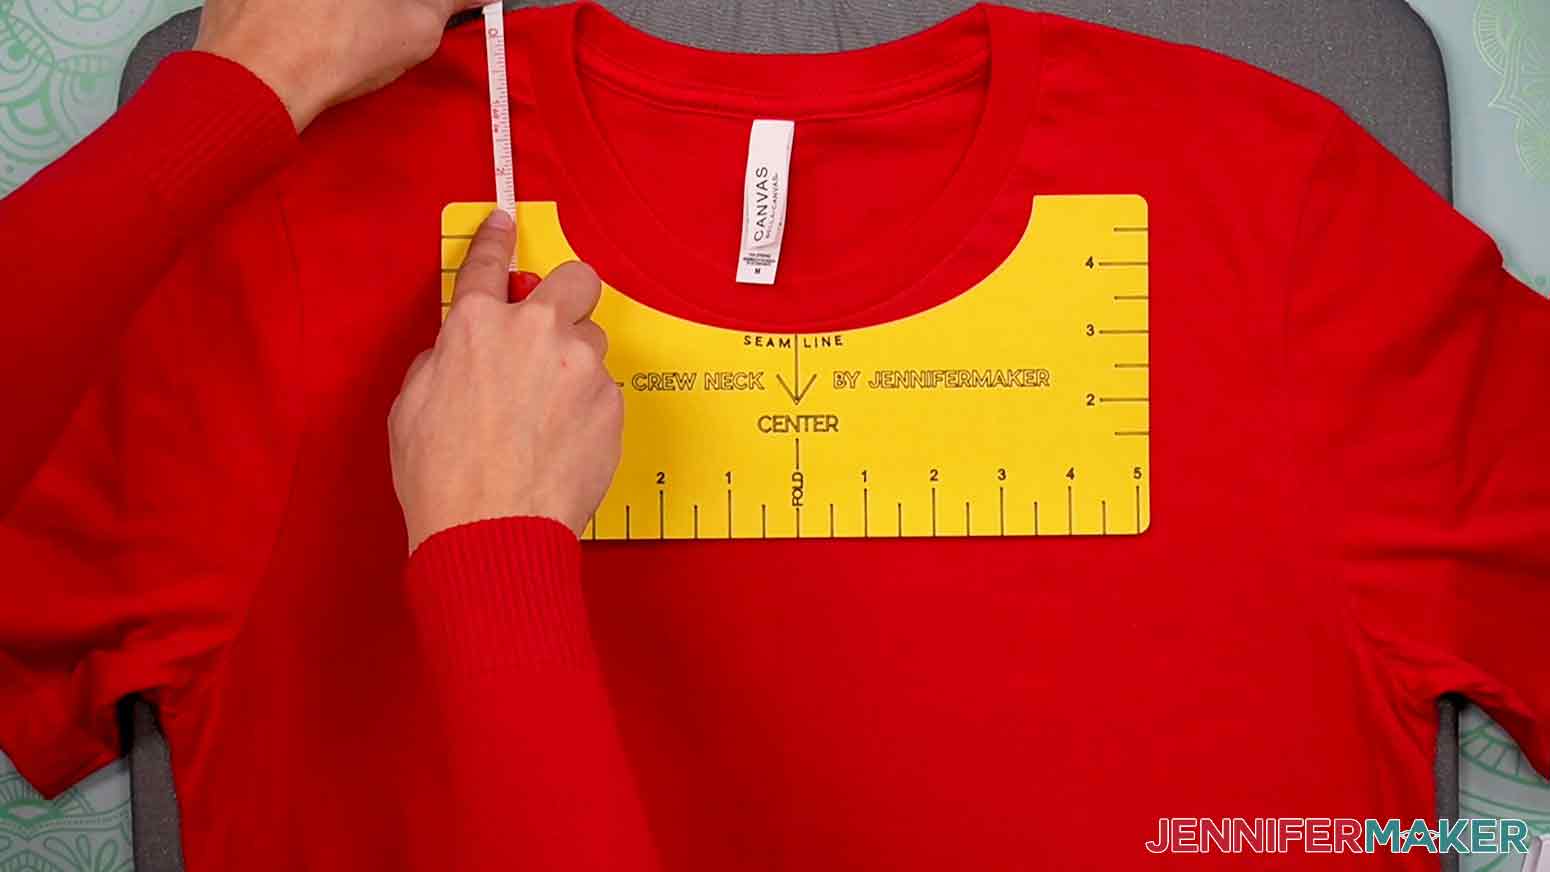 Use a measuring tape to measure the distance between the top left edge of the T-Shirt Ruler and the left shoulder seam of the t-shirt.